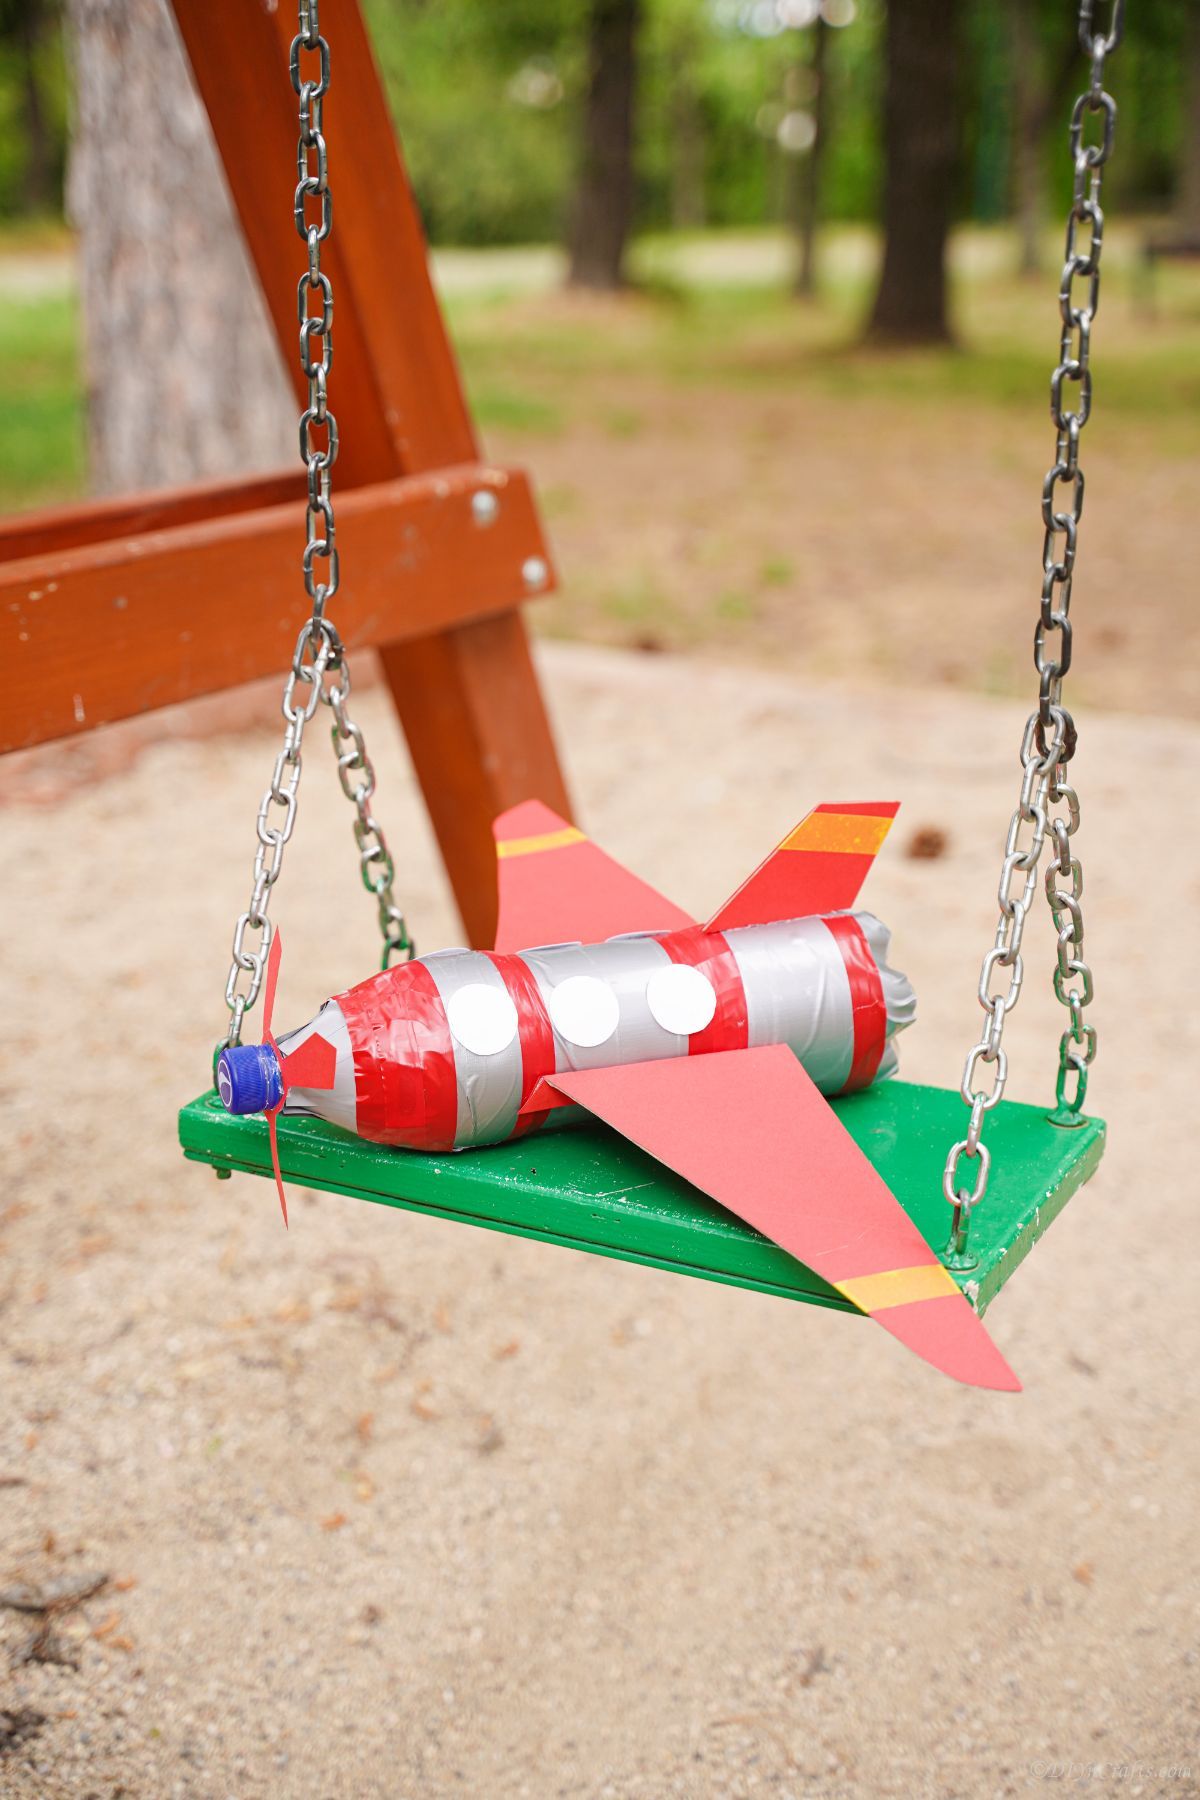 red and silver plastic bottle airplane on swignset